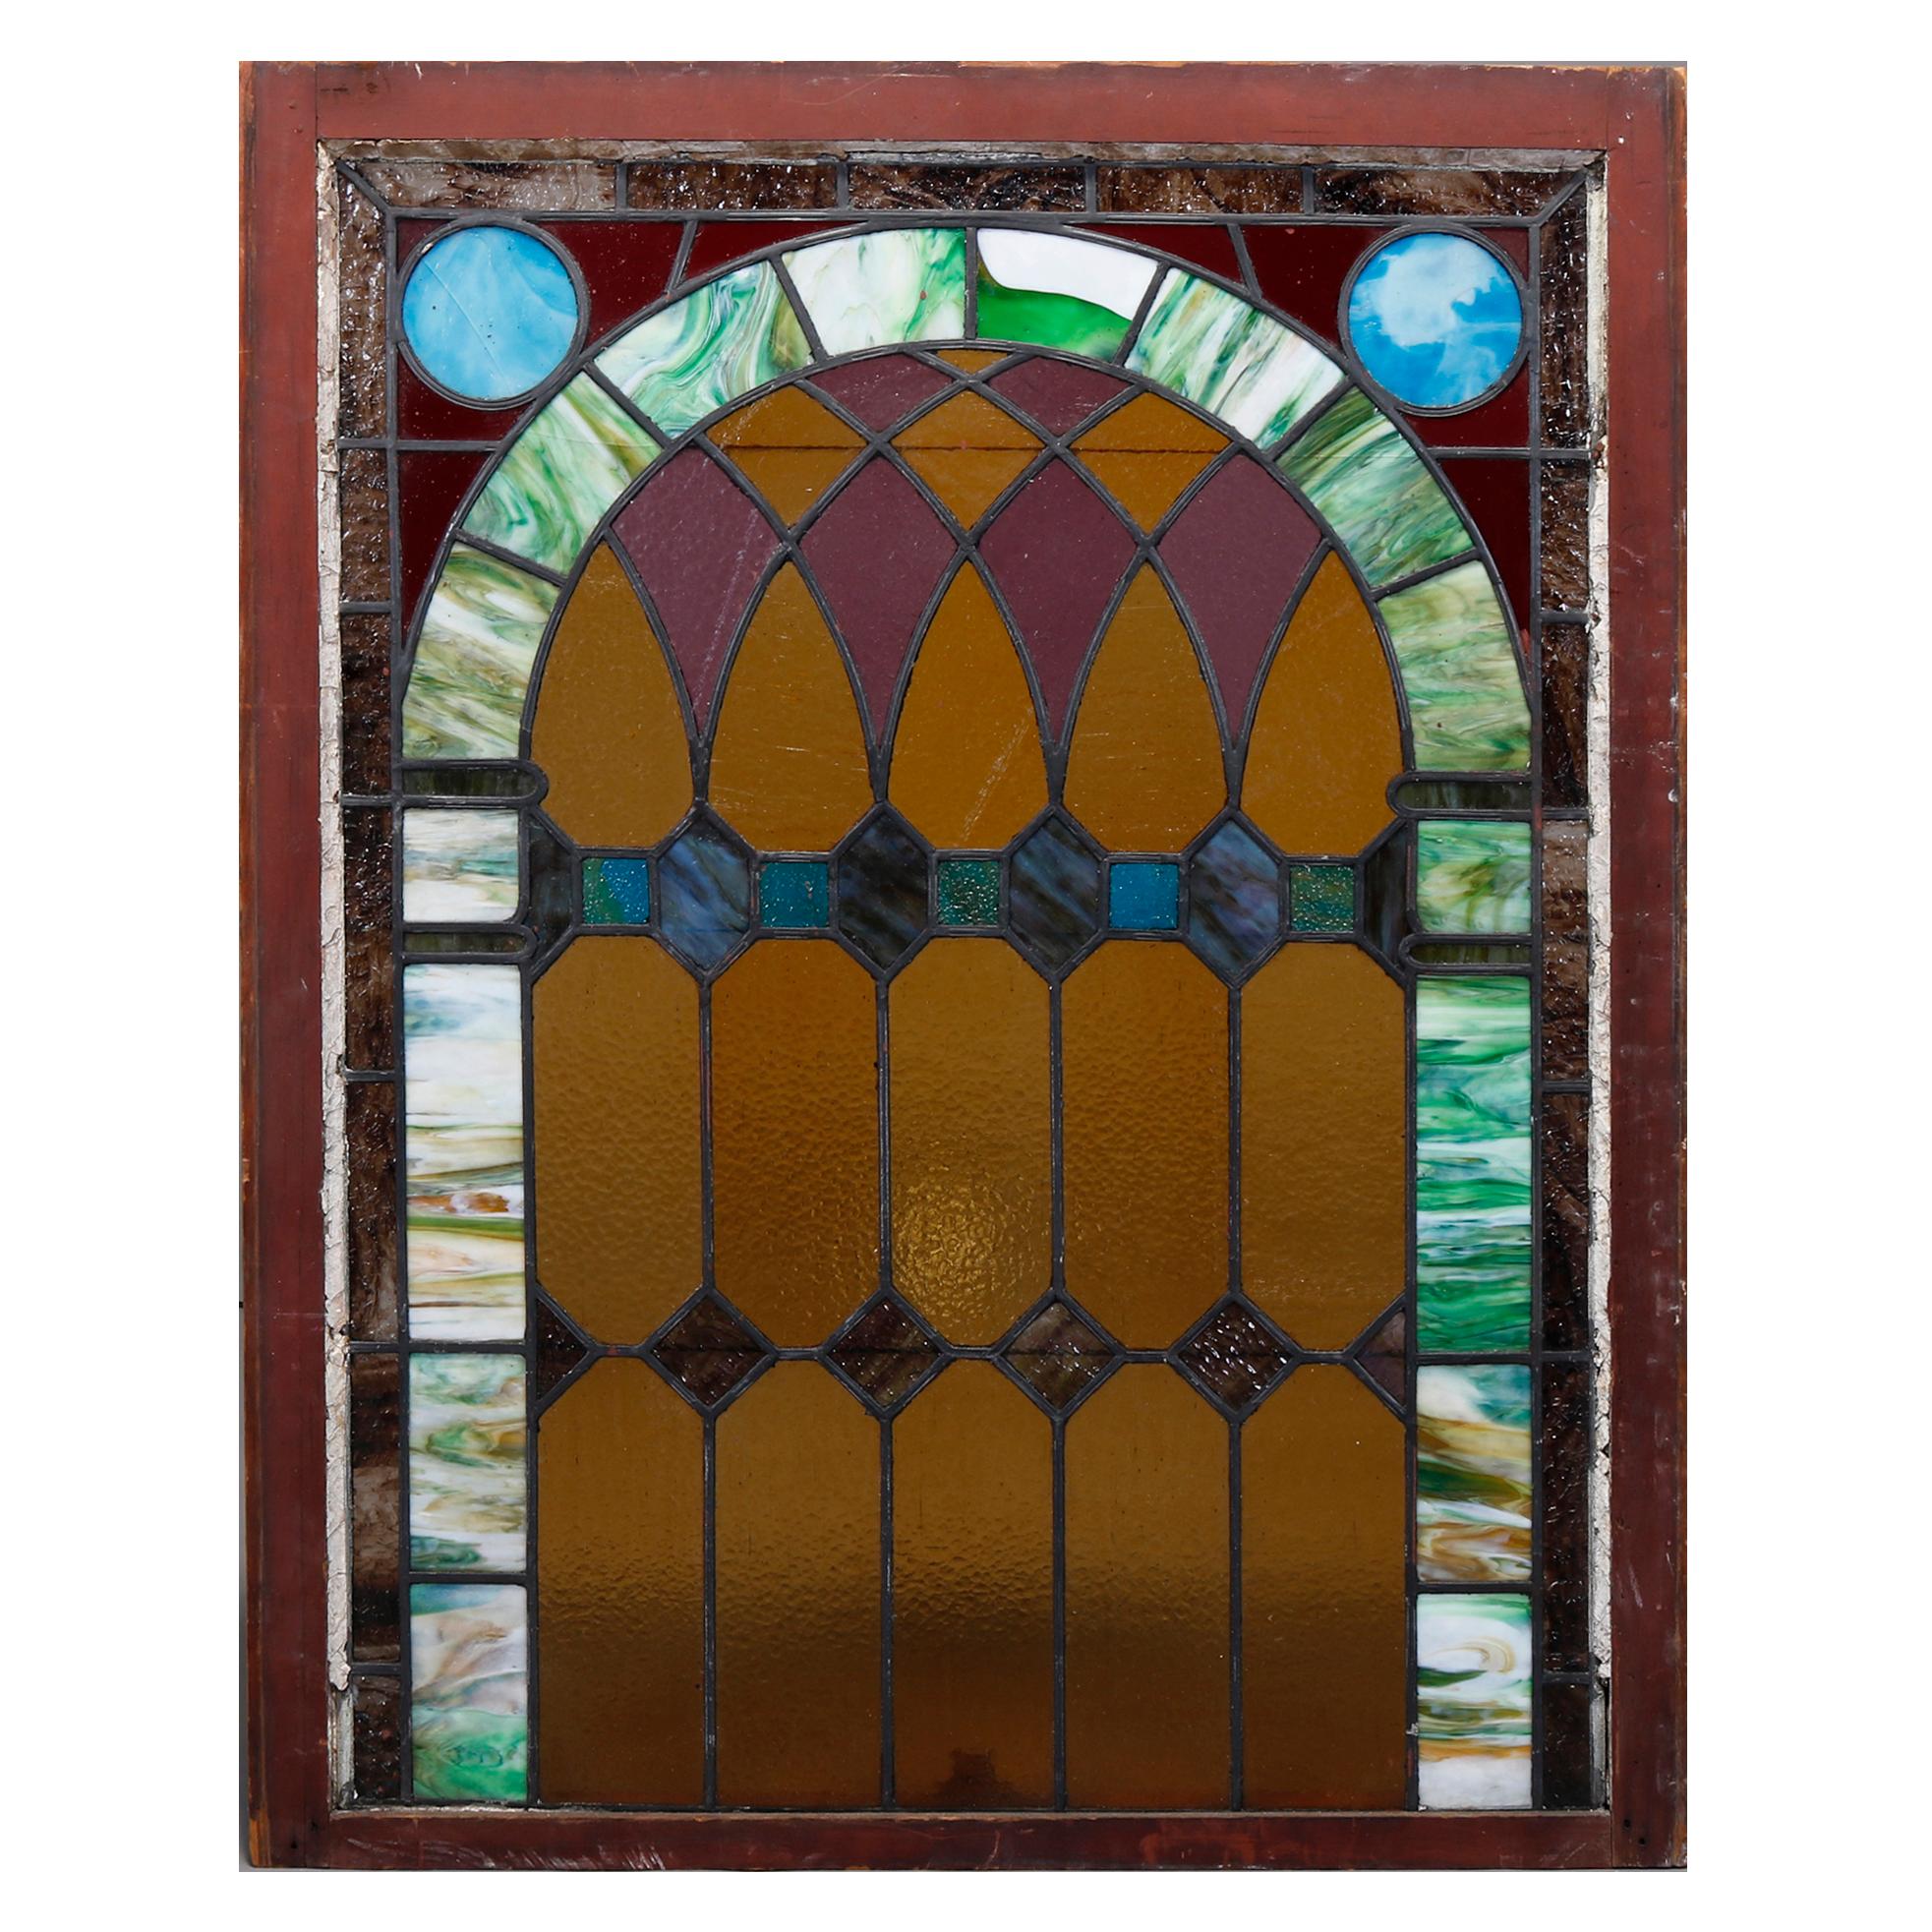 An antique set of two leaded stained and slag glass windows offer geometric and arched design, architectural elements, one with wood frame, 19th century

Measures: With frame 43